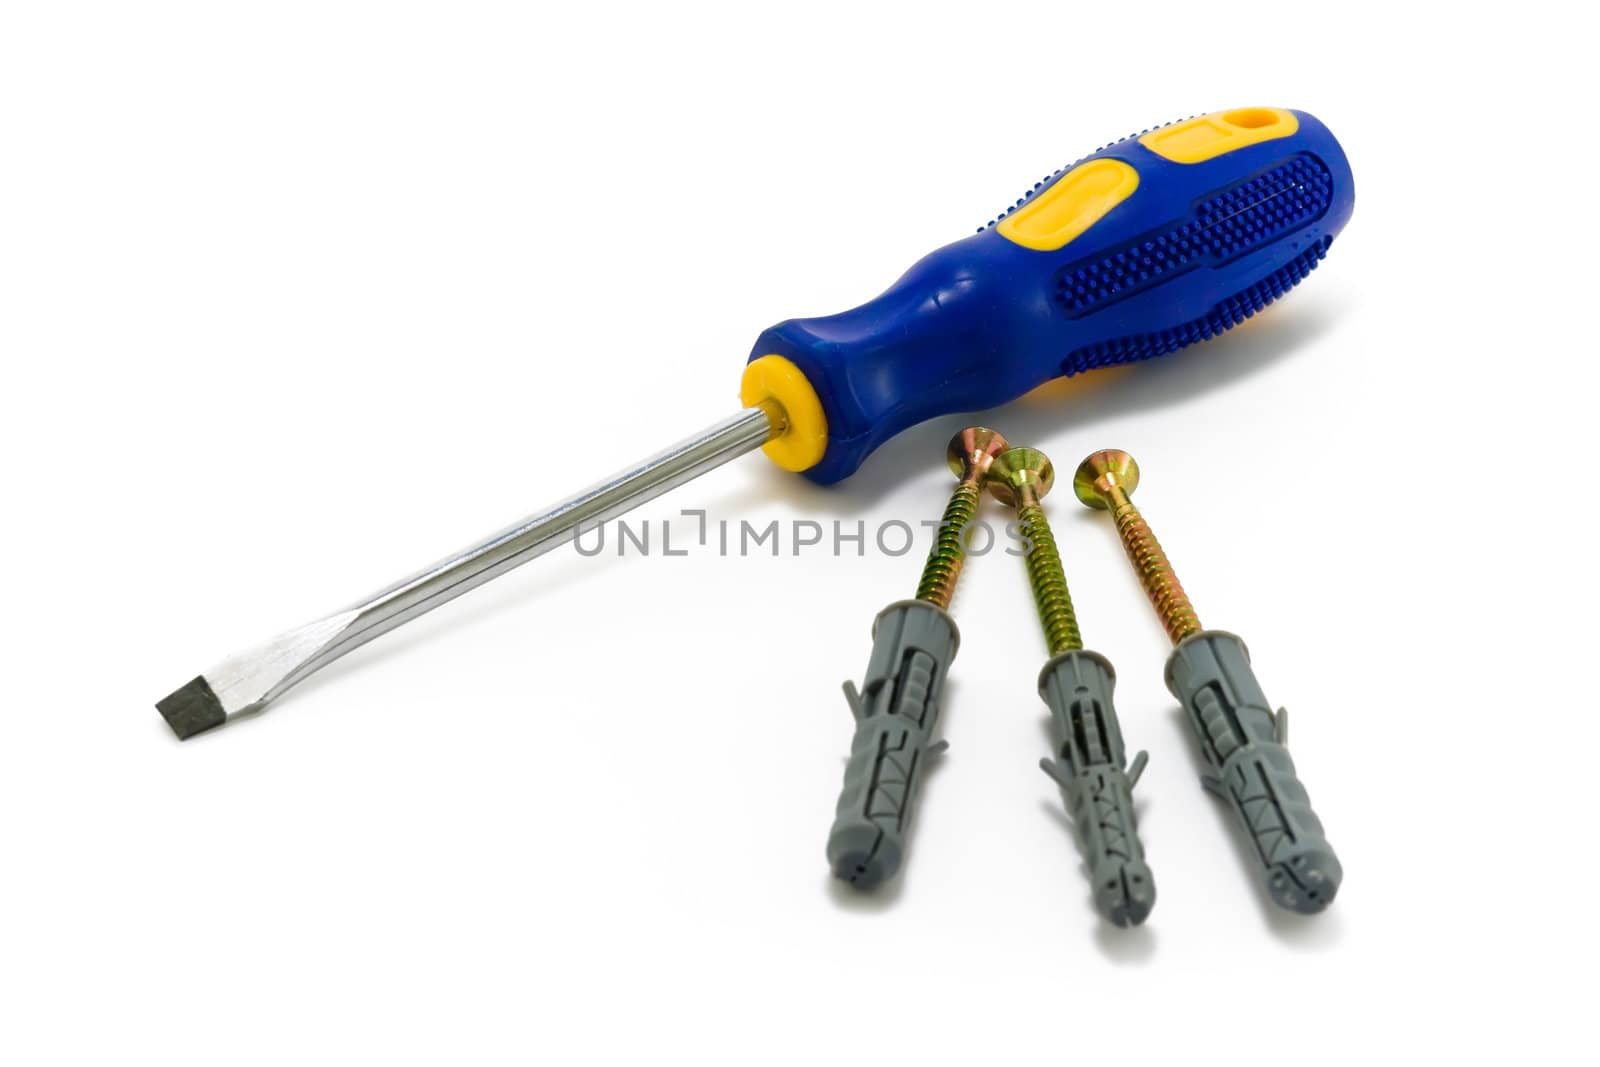 Stainless screwdriver with blue plastic handle and zinc screws on white